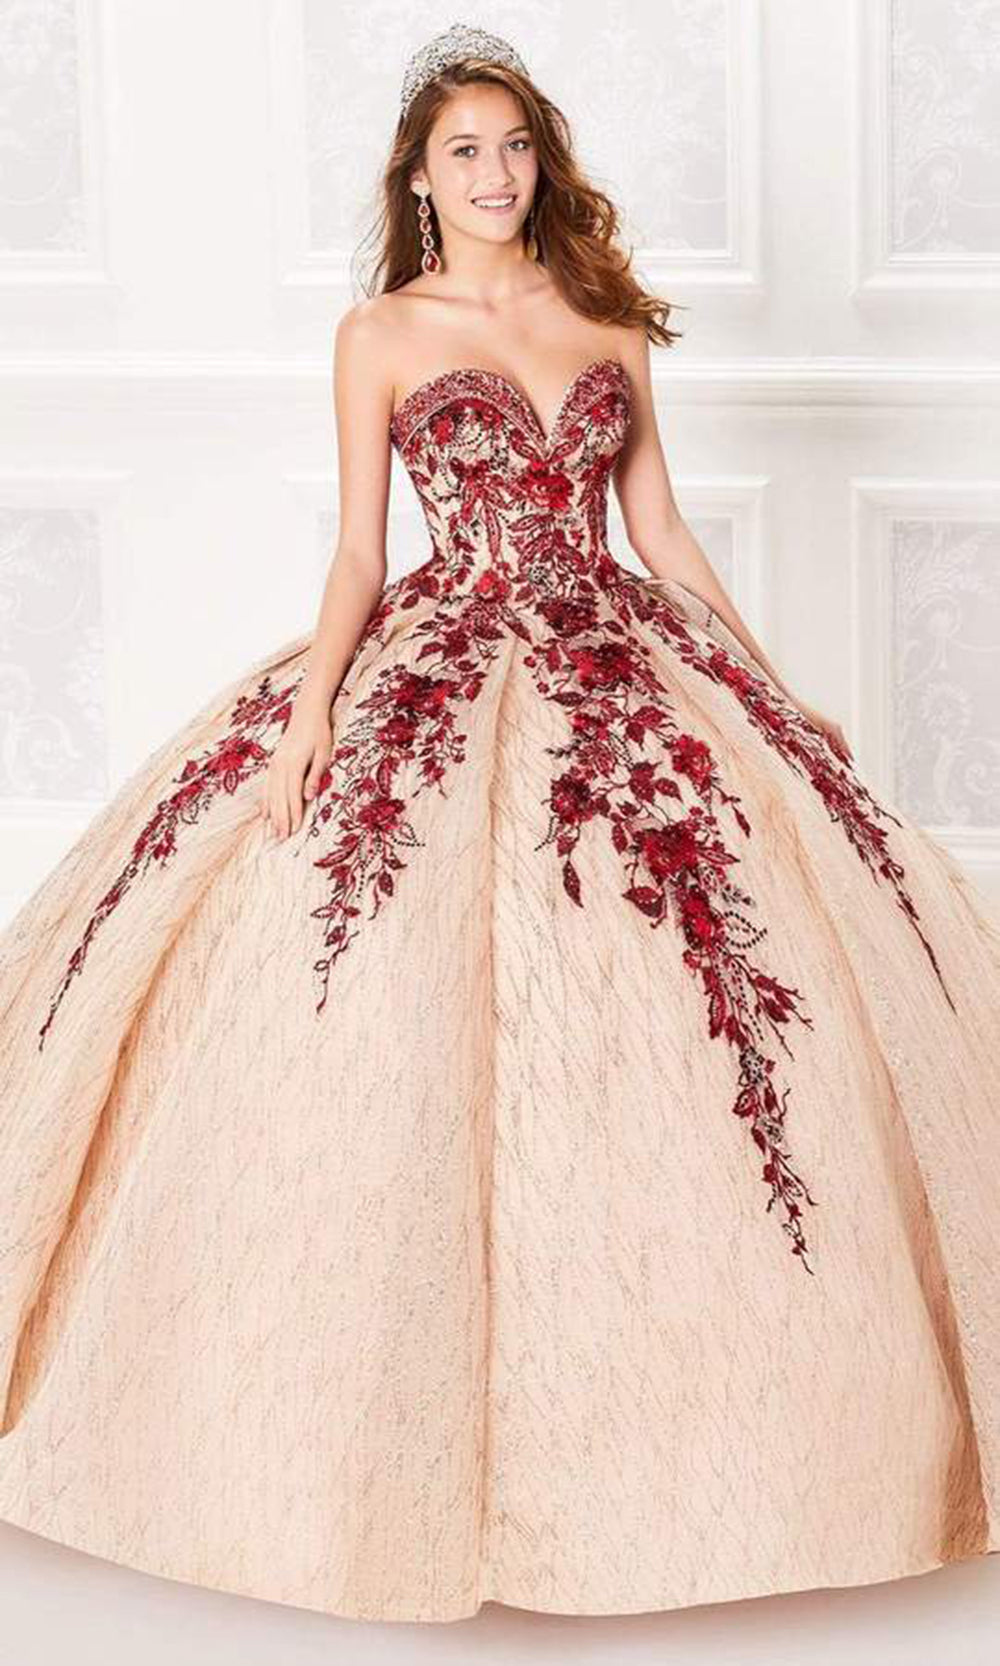 Princesa by Ariana Vara - Floral Embroidered Ballgown In Gold and Red